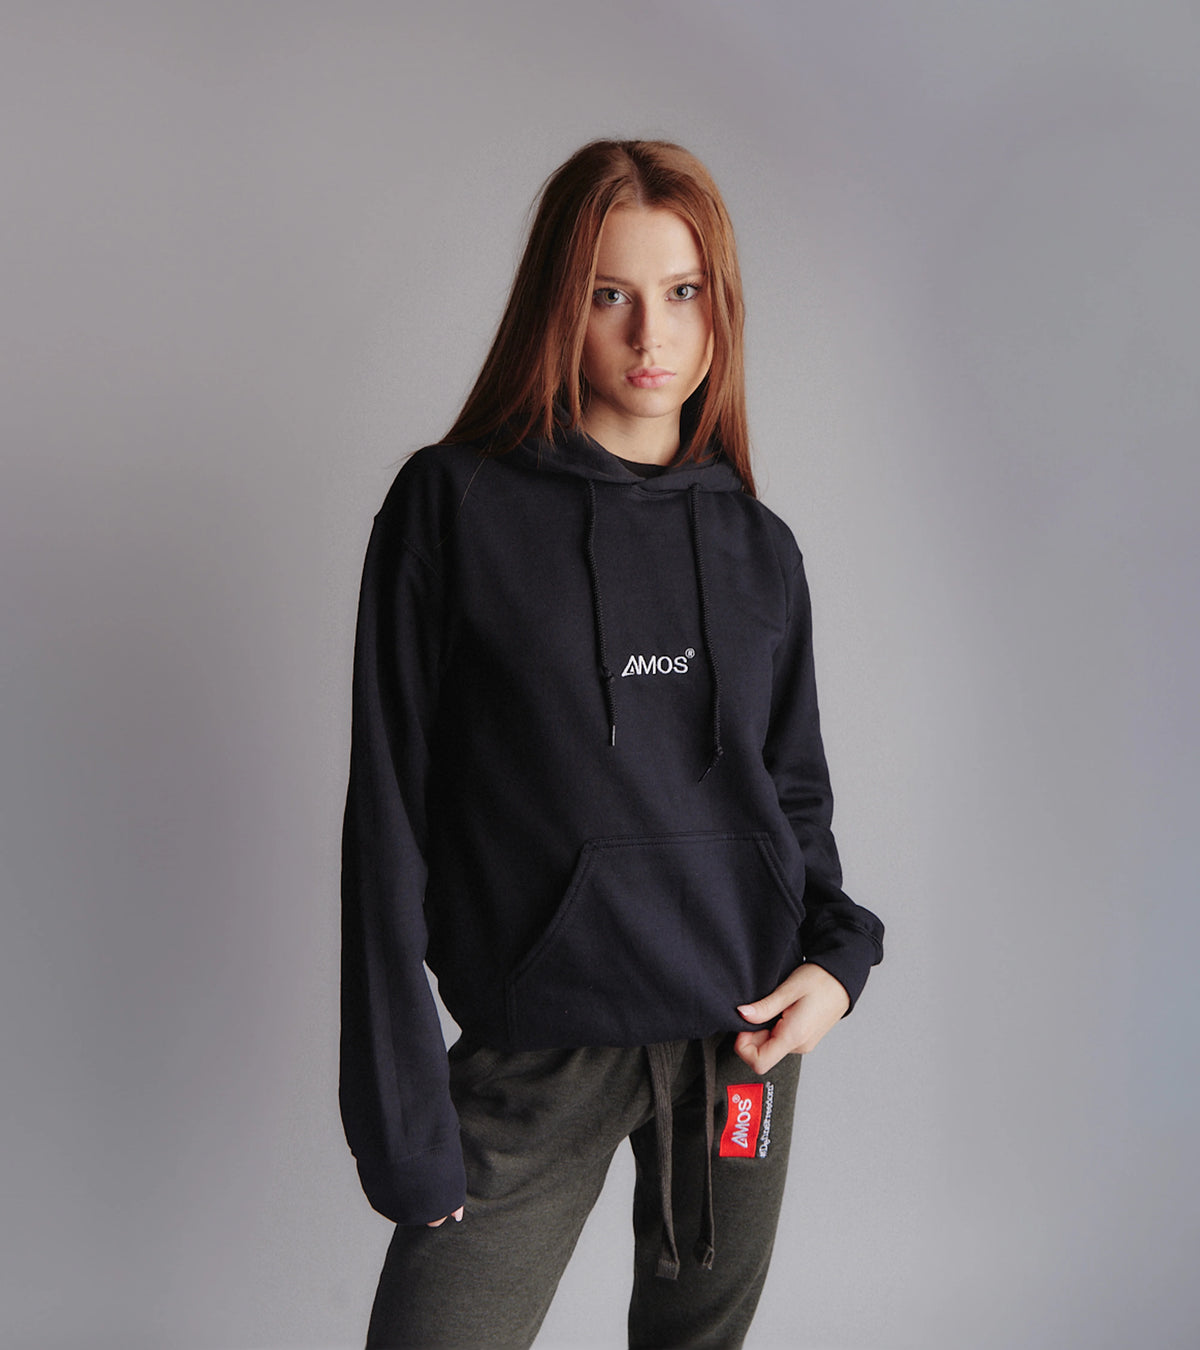 Embroidered Hoodies - Not Human Graphic Hoodies